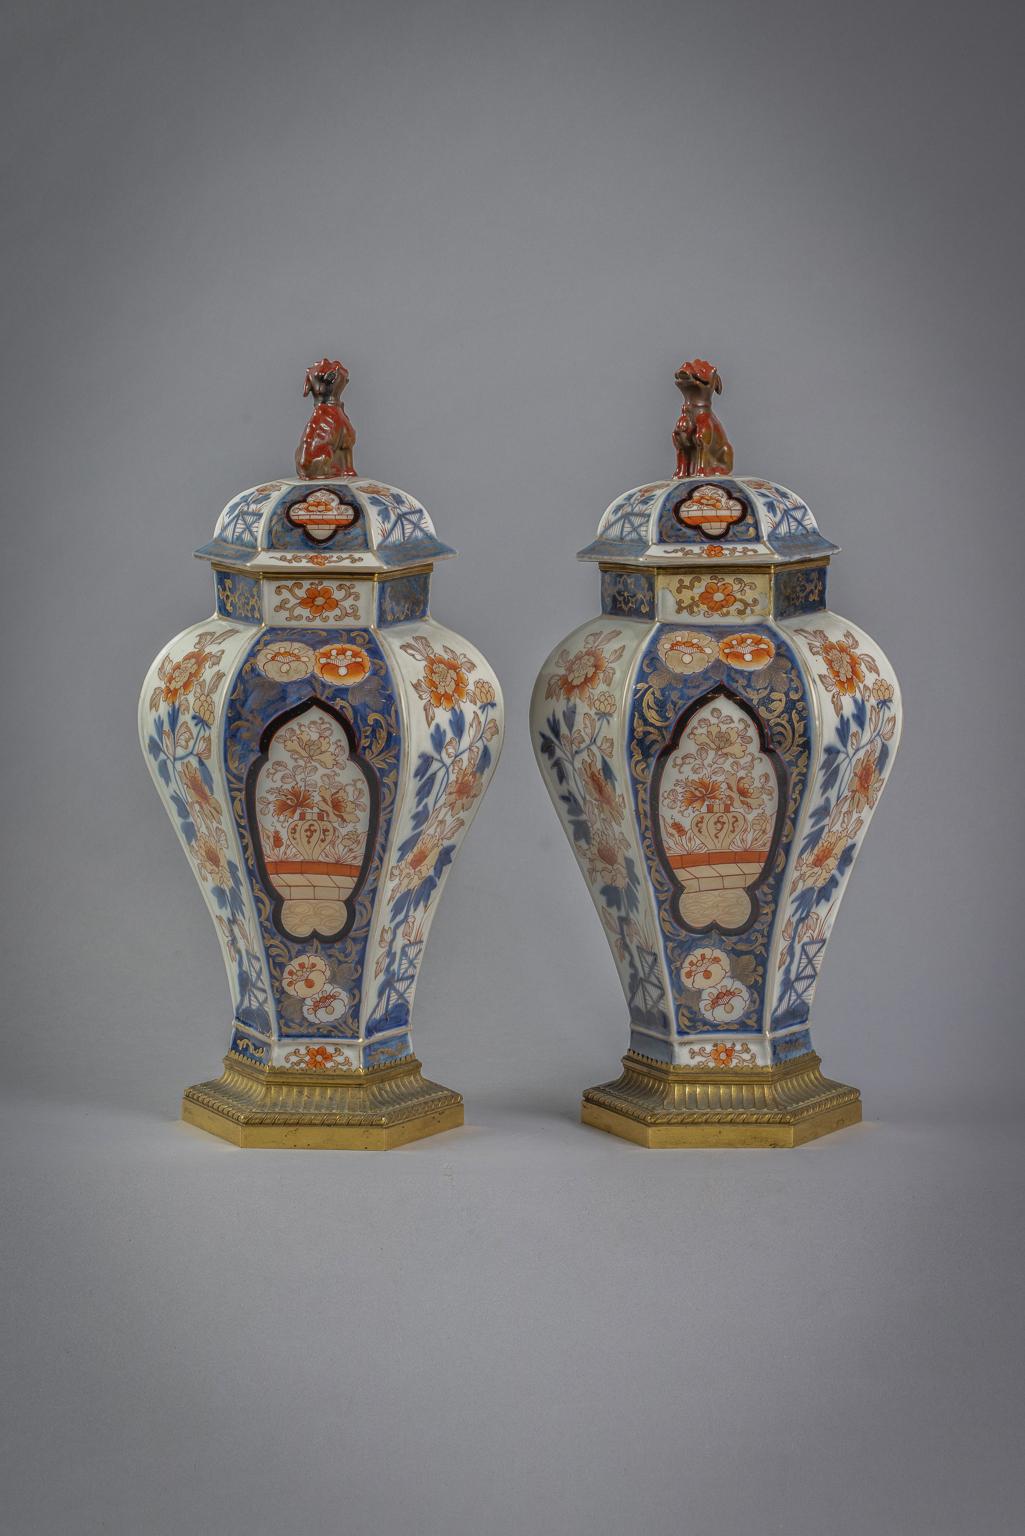 Imari style with panels of foliage on a white ground alternating with panels on an underglaze blue ground with florets and flowers in a vase. The covers similarly decorated and with a foo dog finial.